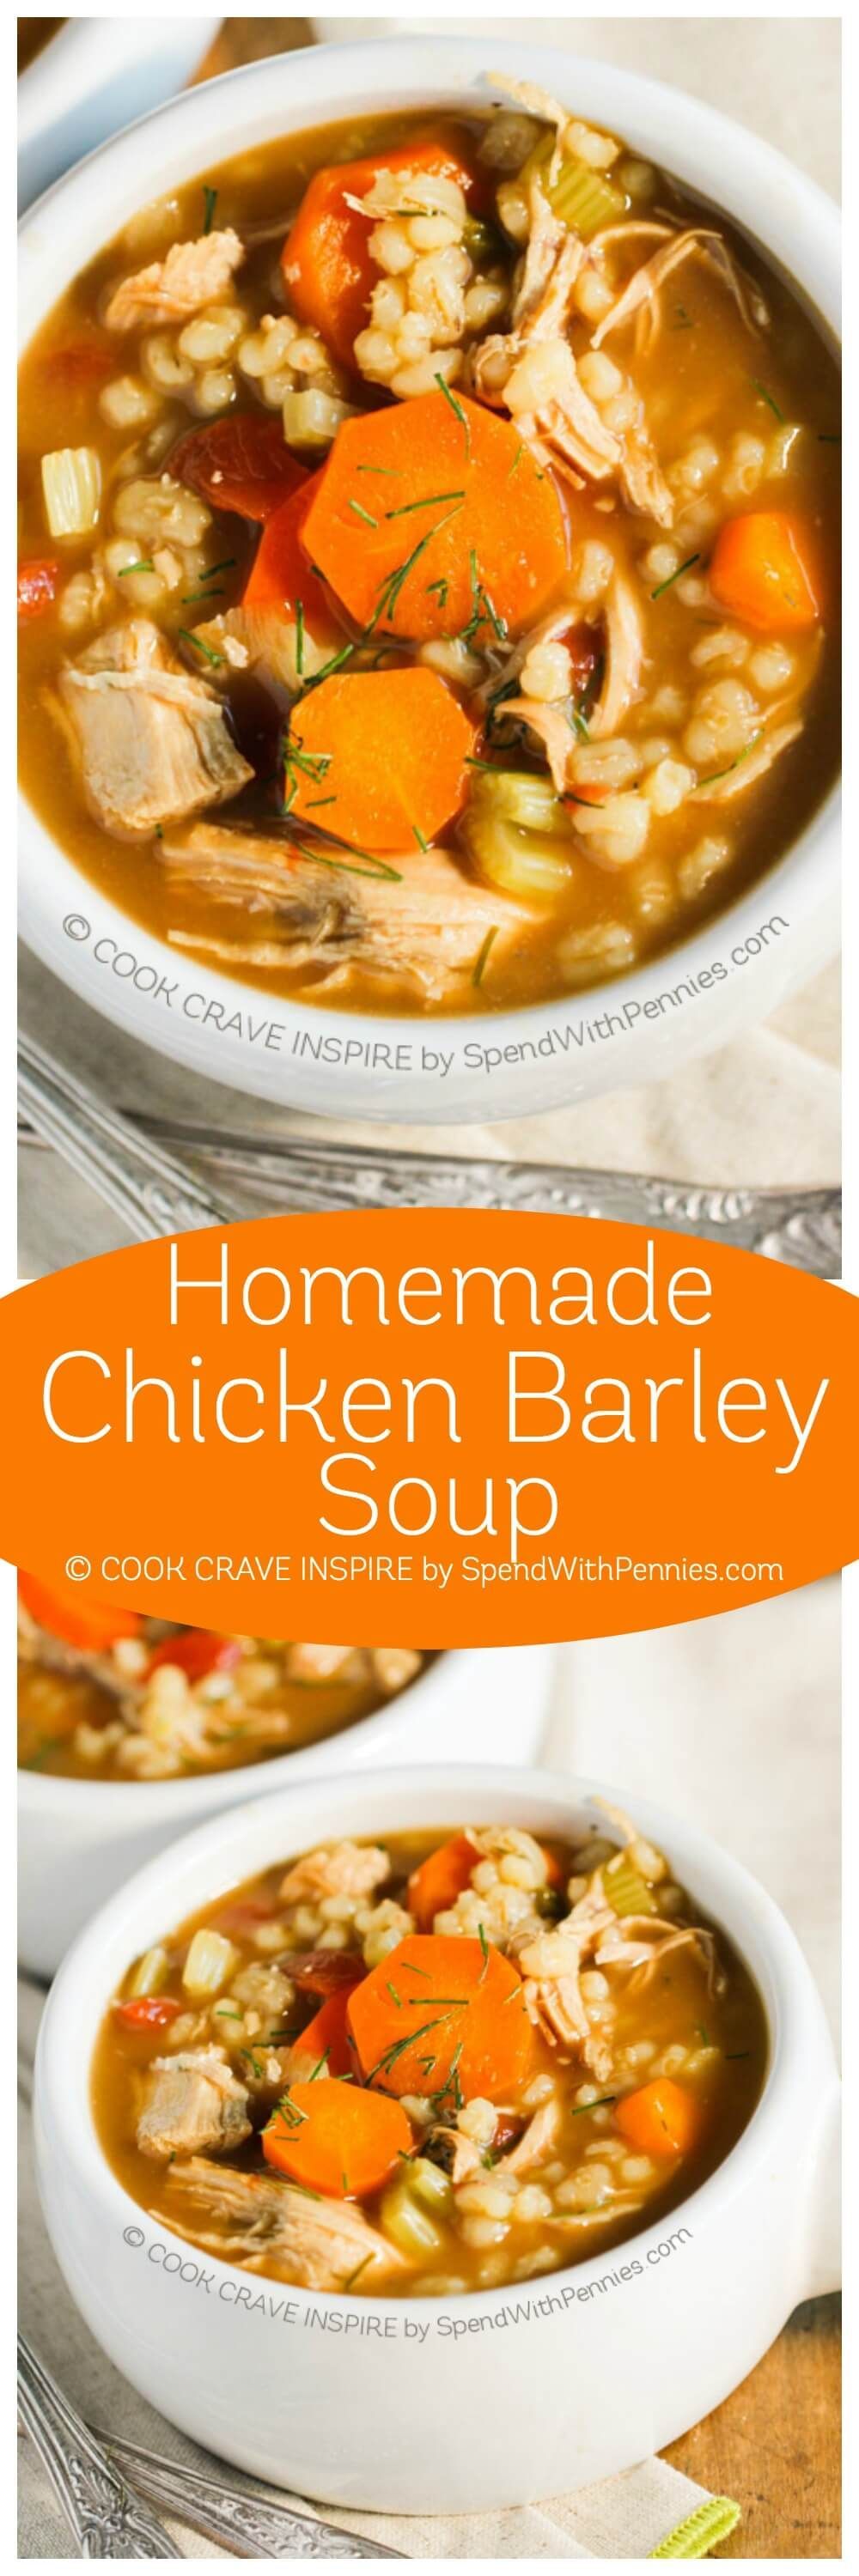 Homemade Chicken Barley Soup! This perfect cool weather soup will warm you from the inside out! Loads of veggies, barley and